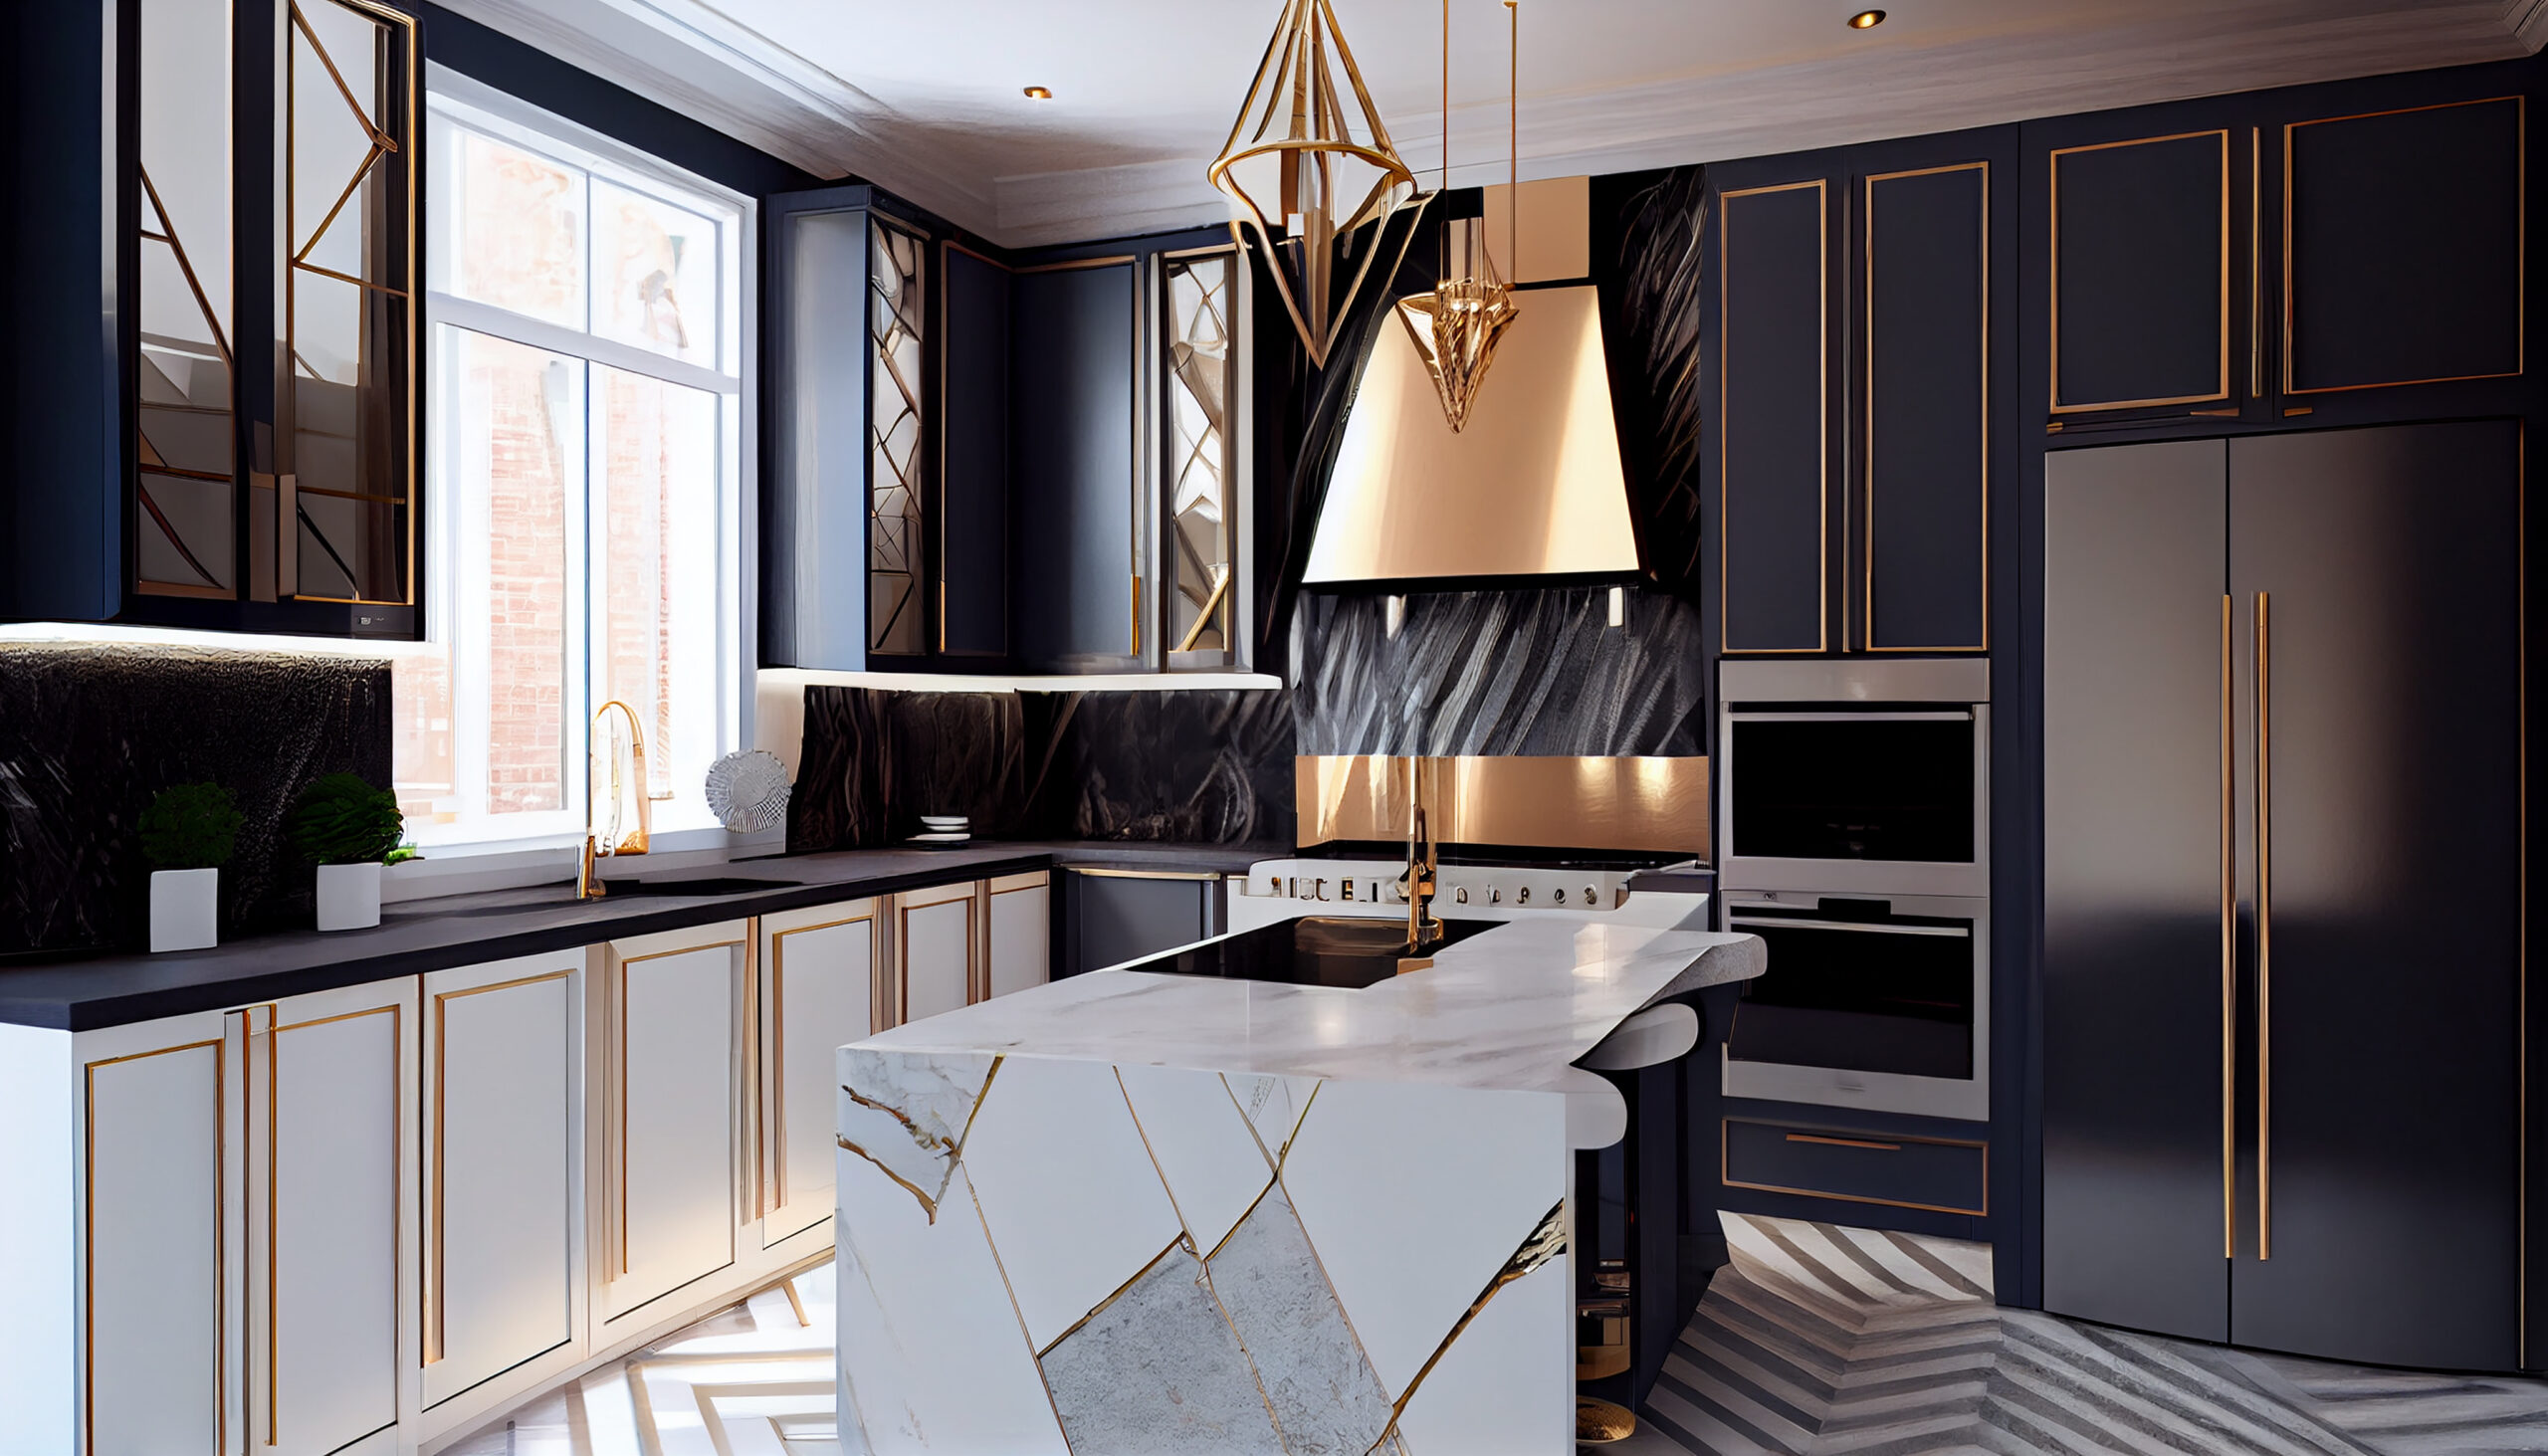 Glamourous modern art deco kitchen with marble island and copper accents.